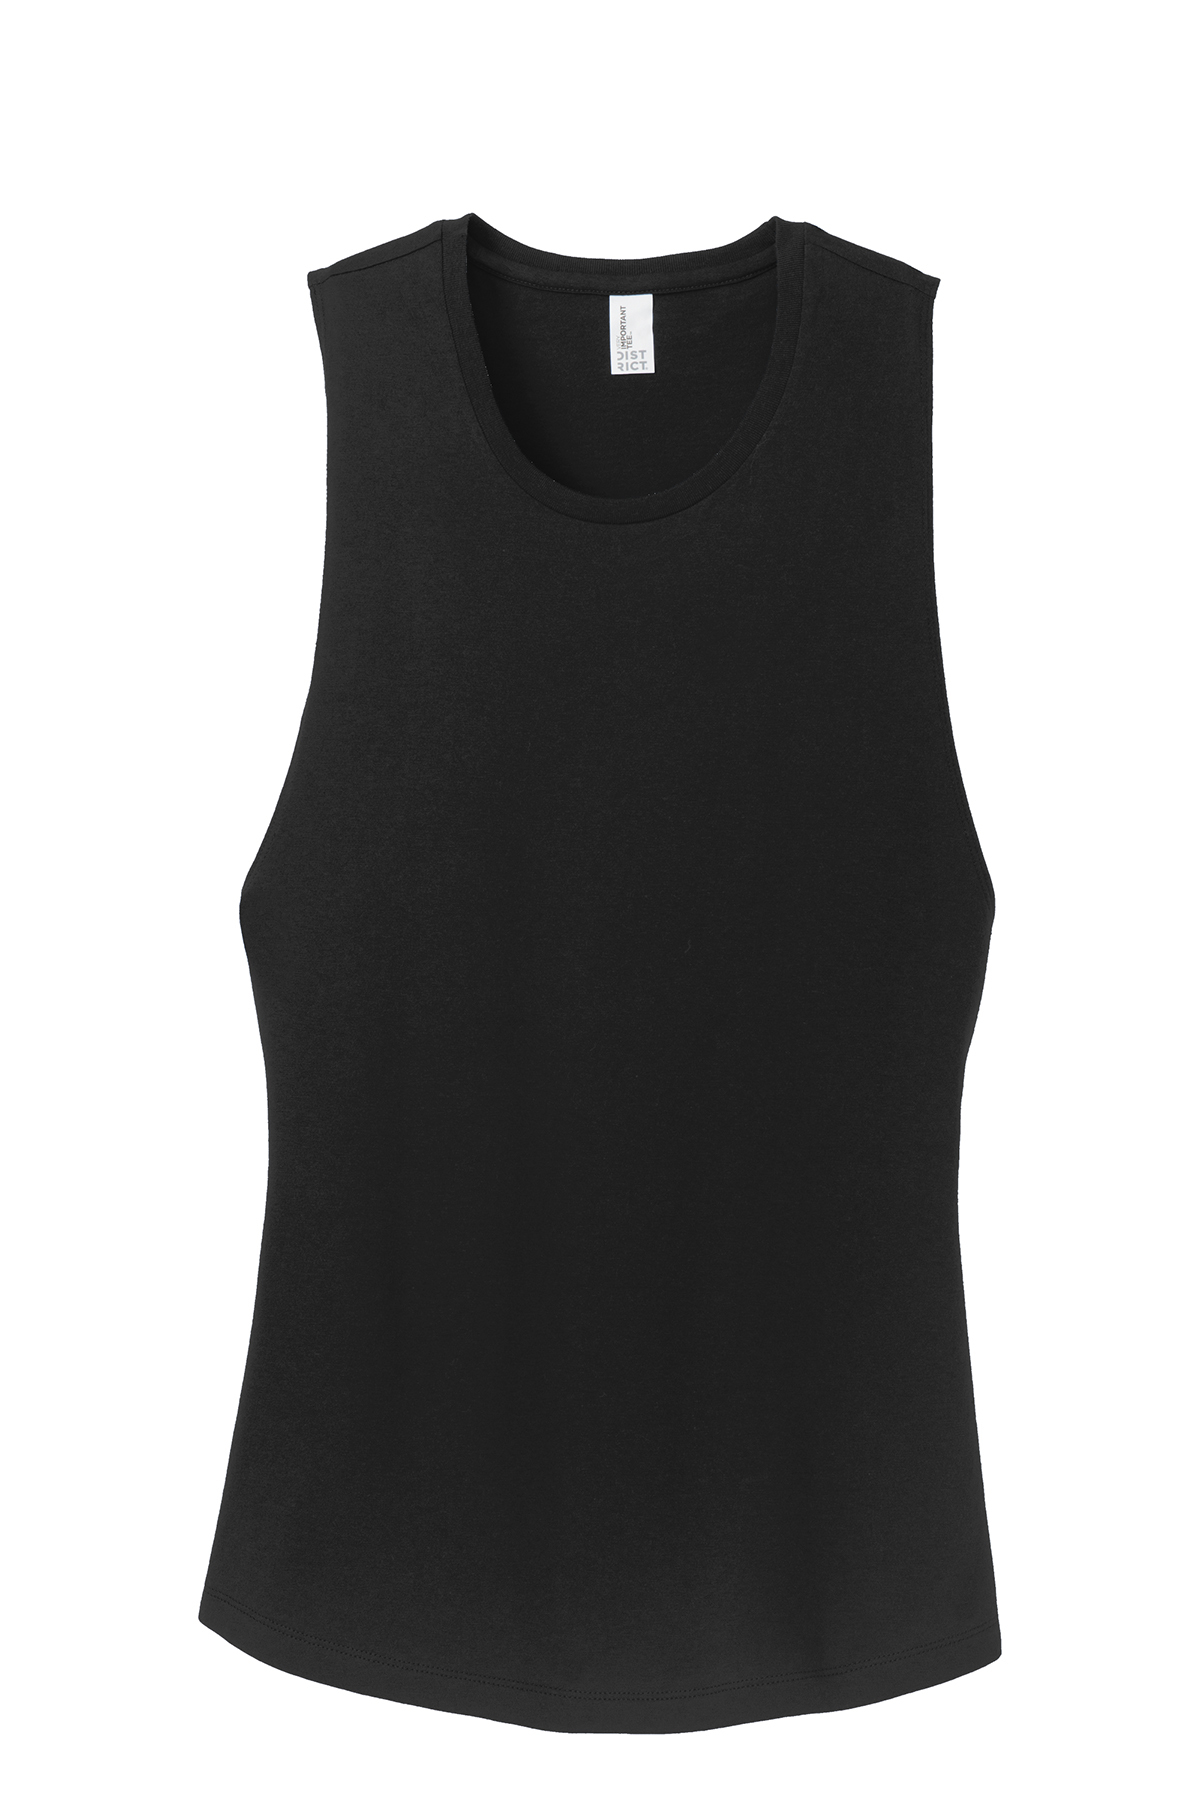 District Women’s Fitted V.I.T.Festival Tank | Product | SanMar